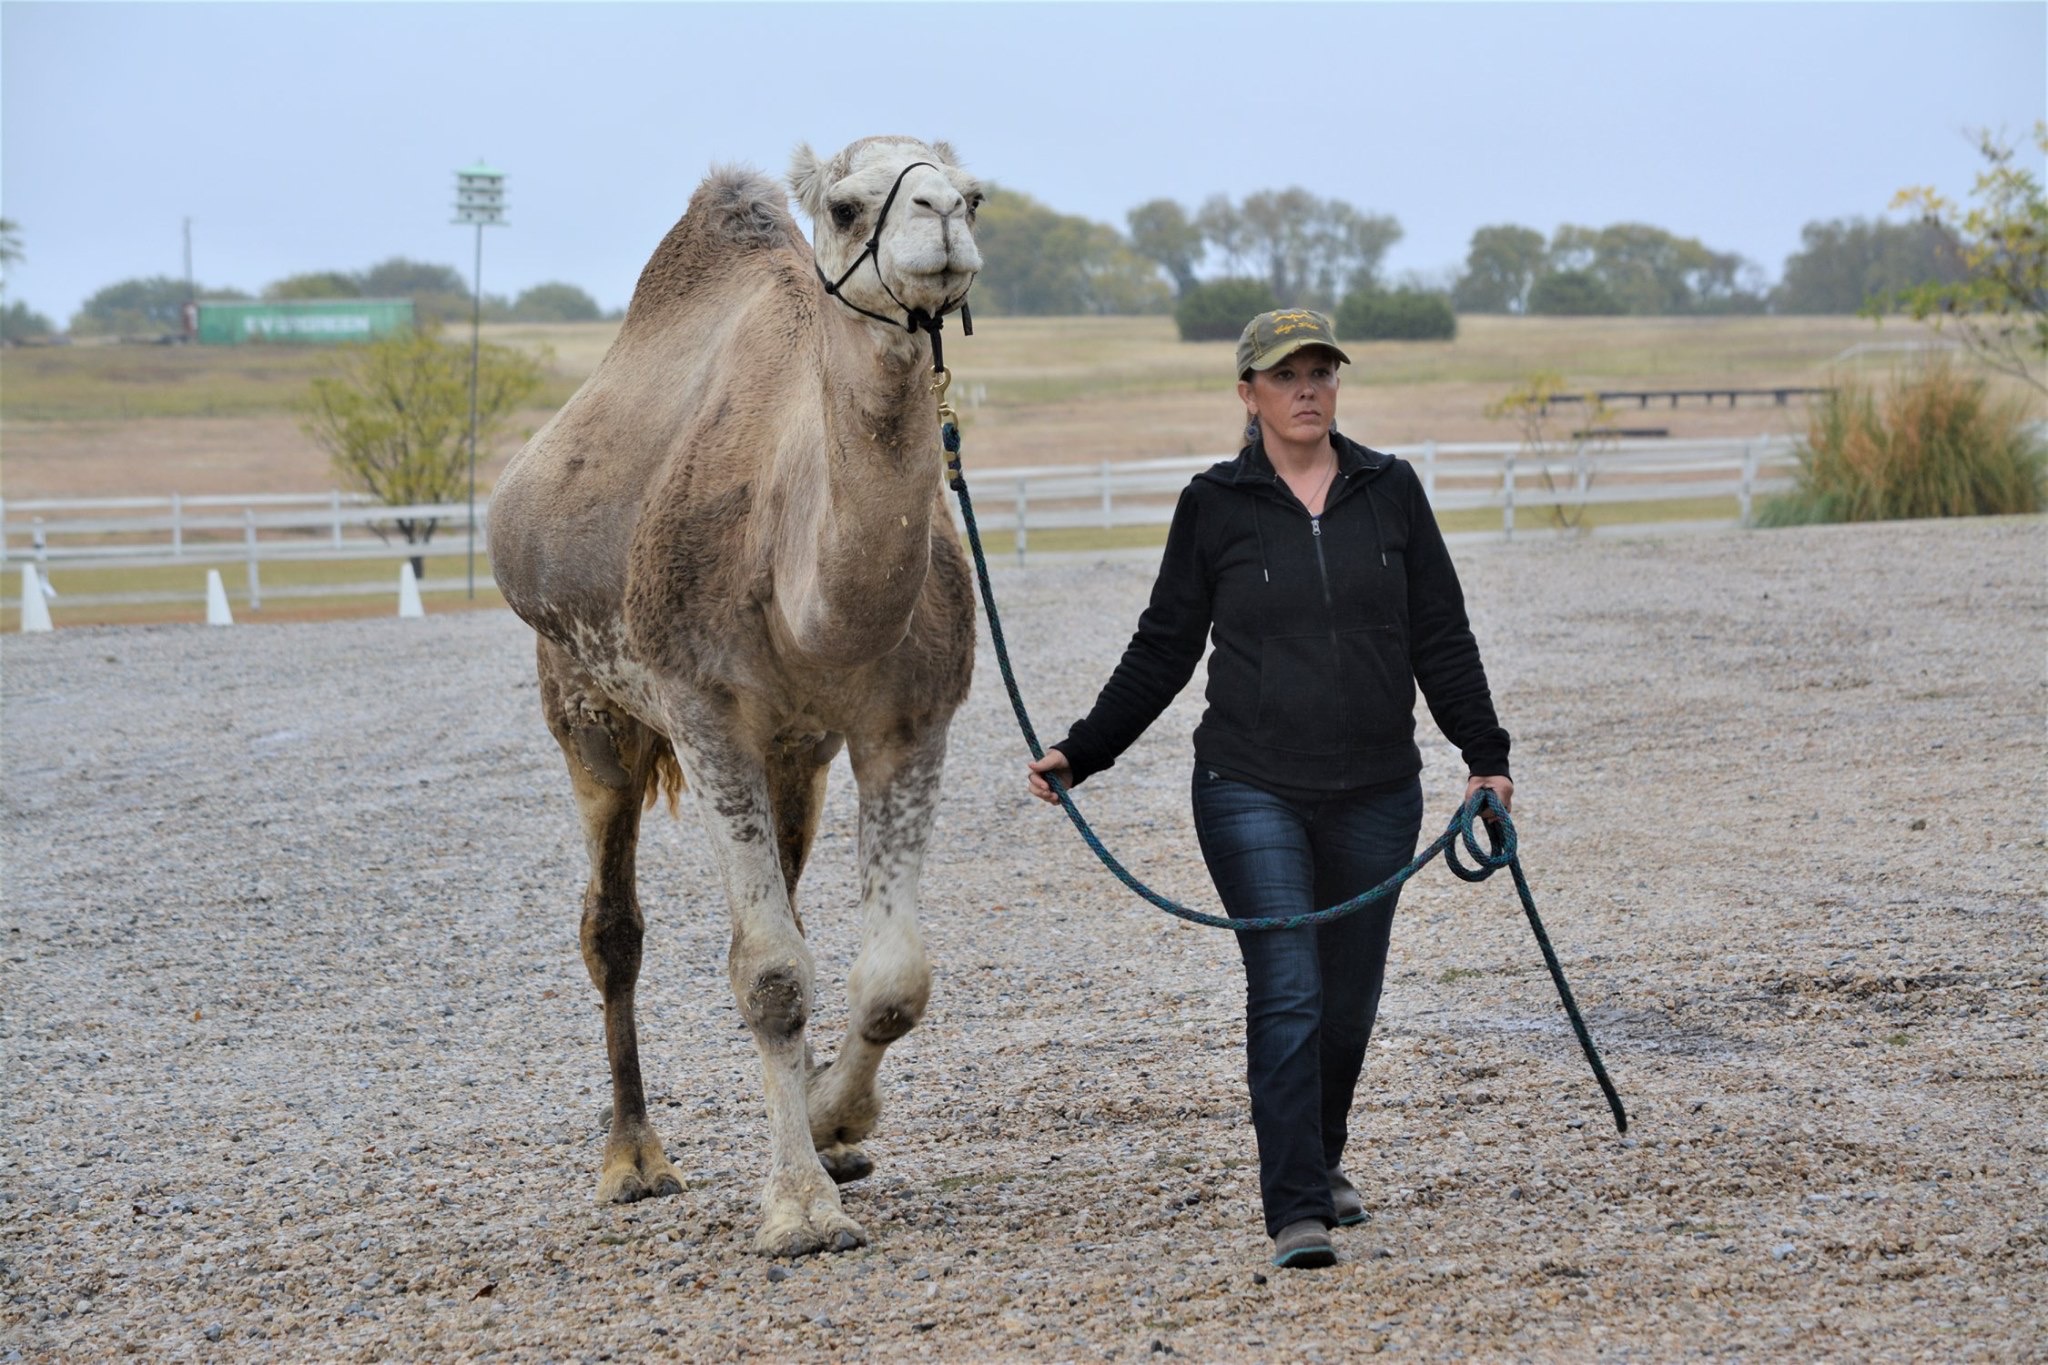 Me walking Buckwheat, one of our camels